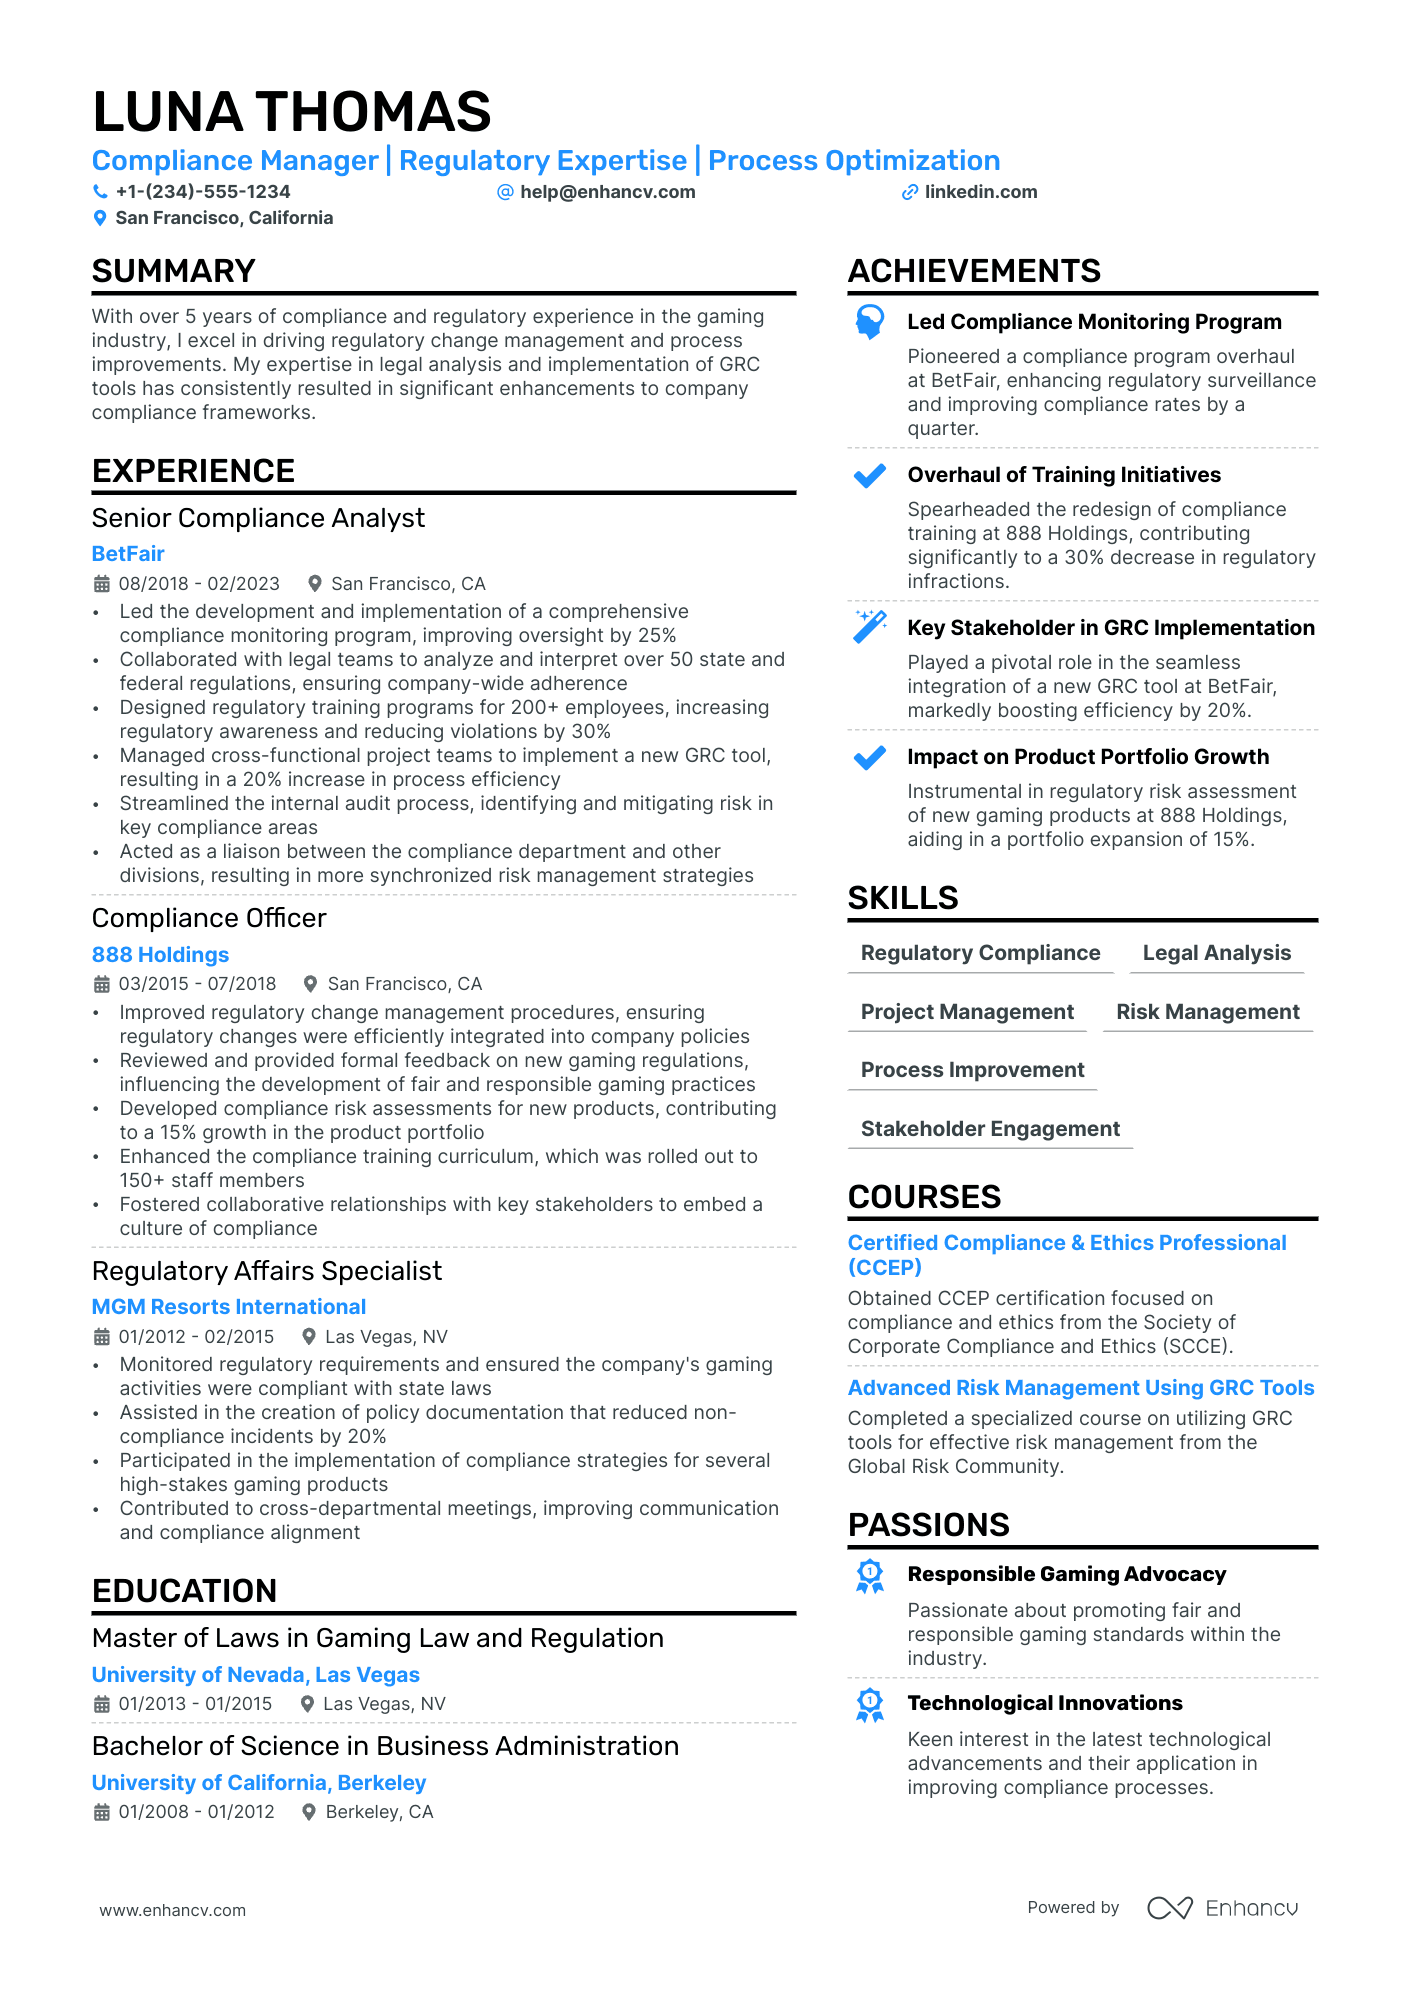 Compliance Manager resume example